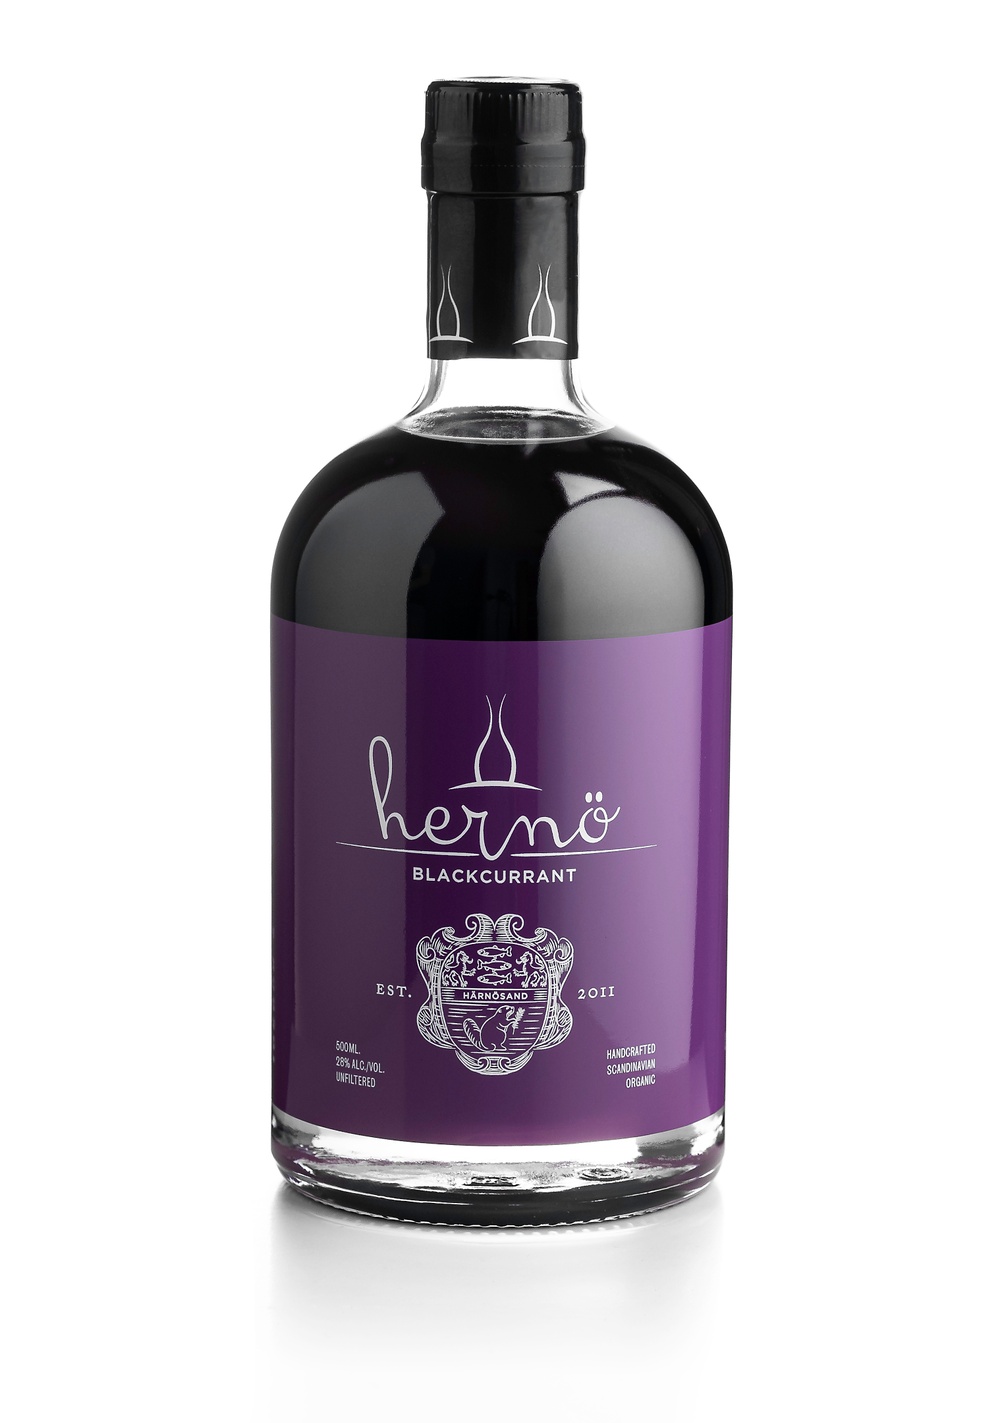 Hernö Blackcurrant is a spirit drink made from Hernö Gin that has been infused with bucketfuls of ripe blackcurrant berries. Matured for a couple of days with the berries and then pressed. Finally sweetened to enhance all the flavours of the fruit. Enjoyable on its own and lovely to serve in a French 75.